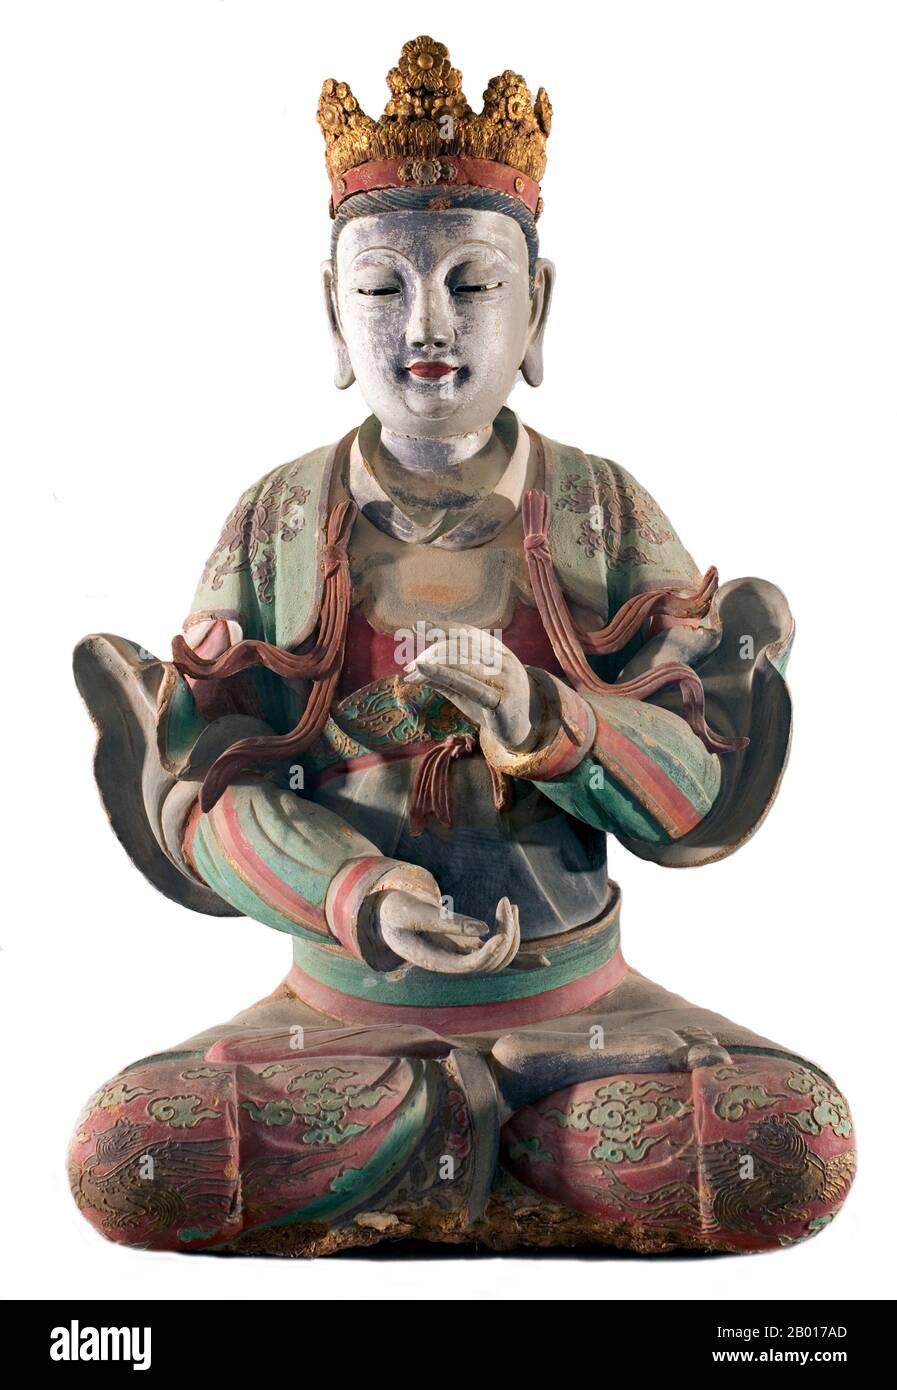 China: Crowned bodhisattva in painted terracotta, late Ming Dynasty (1368-1644).  In Buddhism, a bodhisattva is either an enlightened (bodhi) existence (sattva) or an enlightenment-being or, given the variant Sanskrit spelling satva rather than sattva, 'heroic-minded one (satva) for enlightenment (bodhi)'. It is any person who, motivated by great compassion, has generated bodhicitta, which is a spontaneous wish to attain Buddhahood for the benefit of all sentient beings. Stock Photo